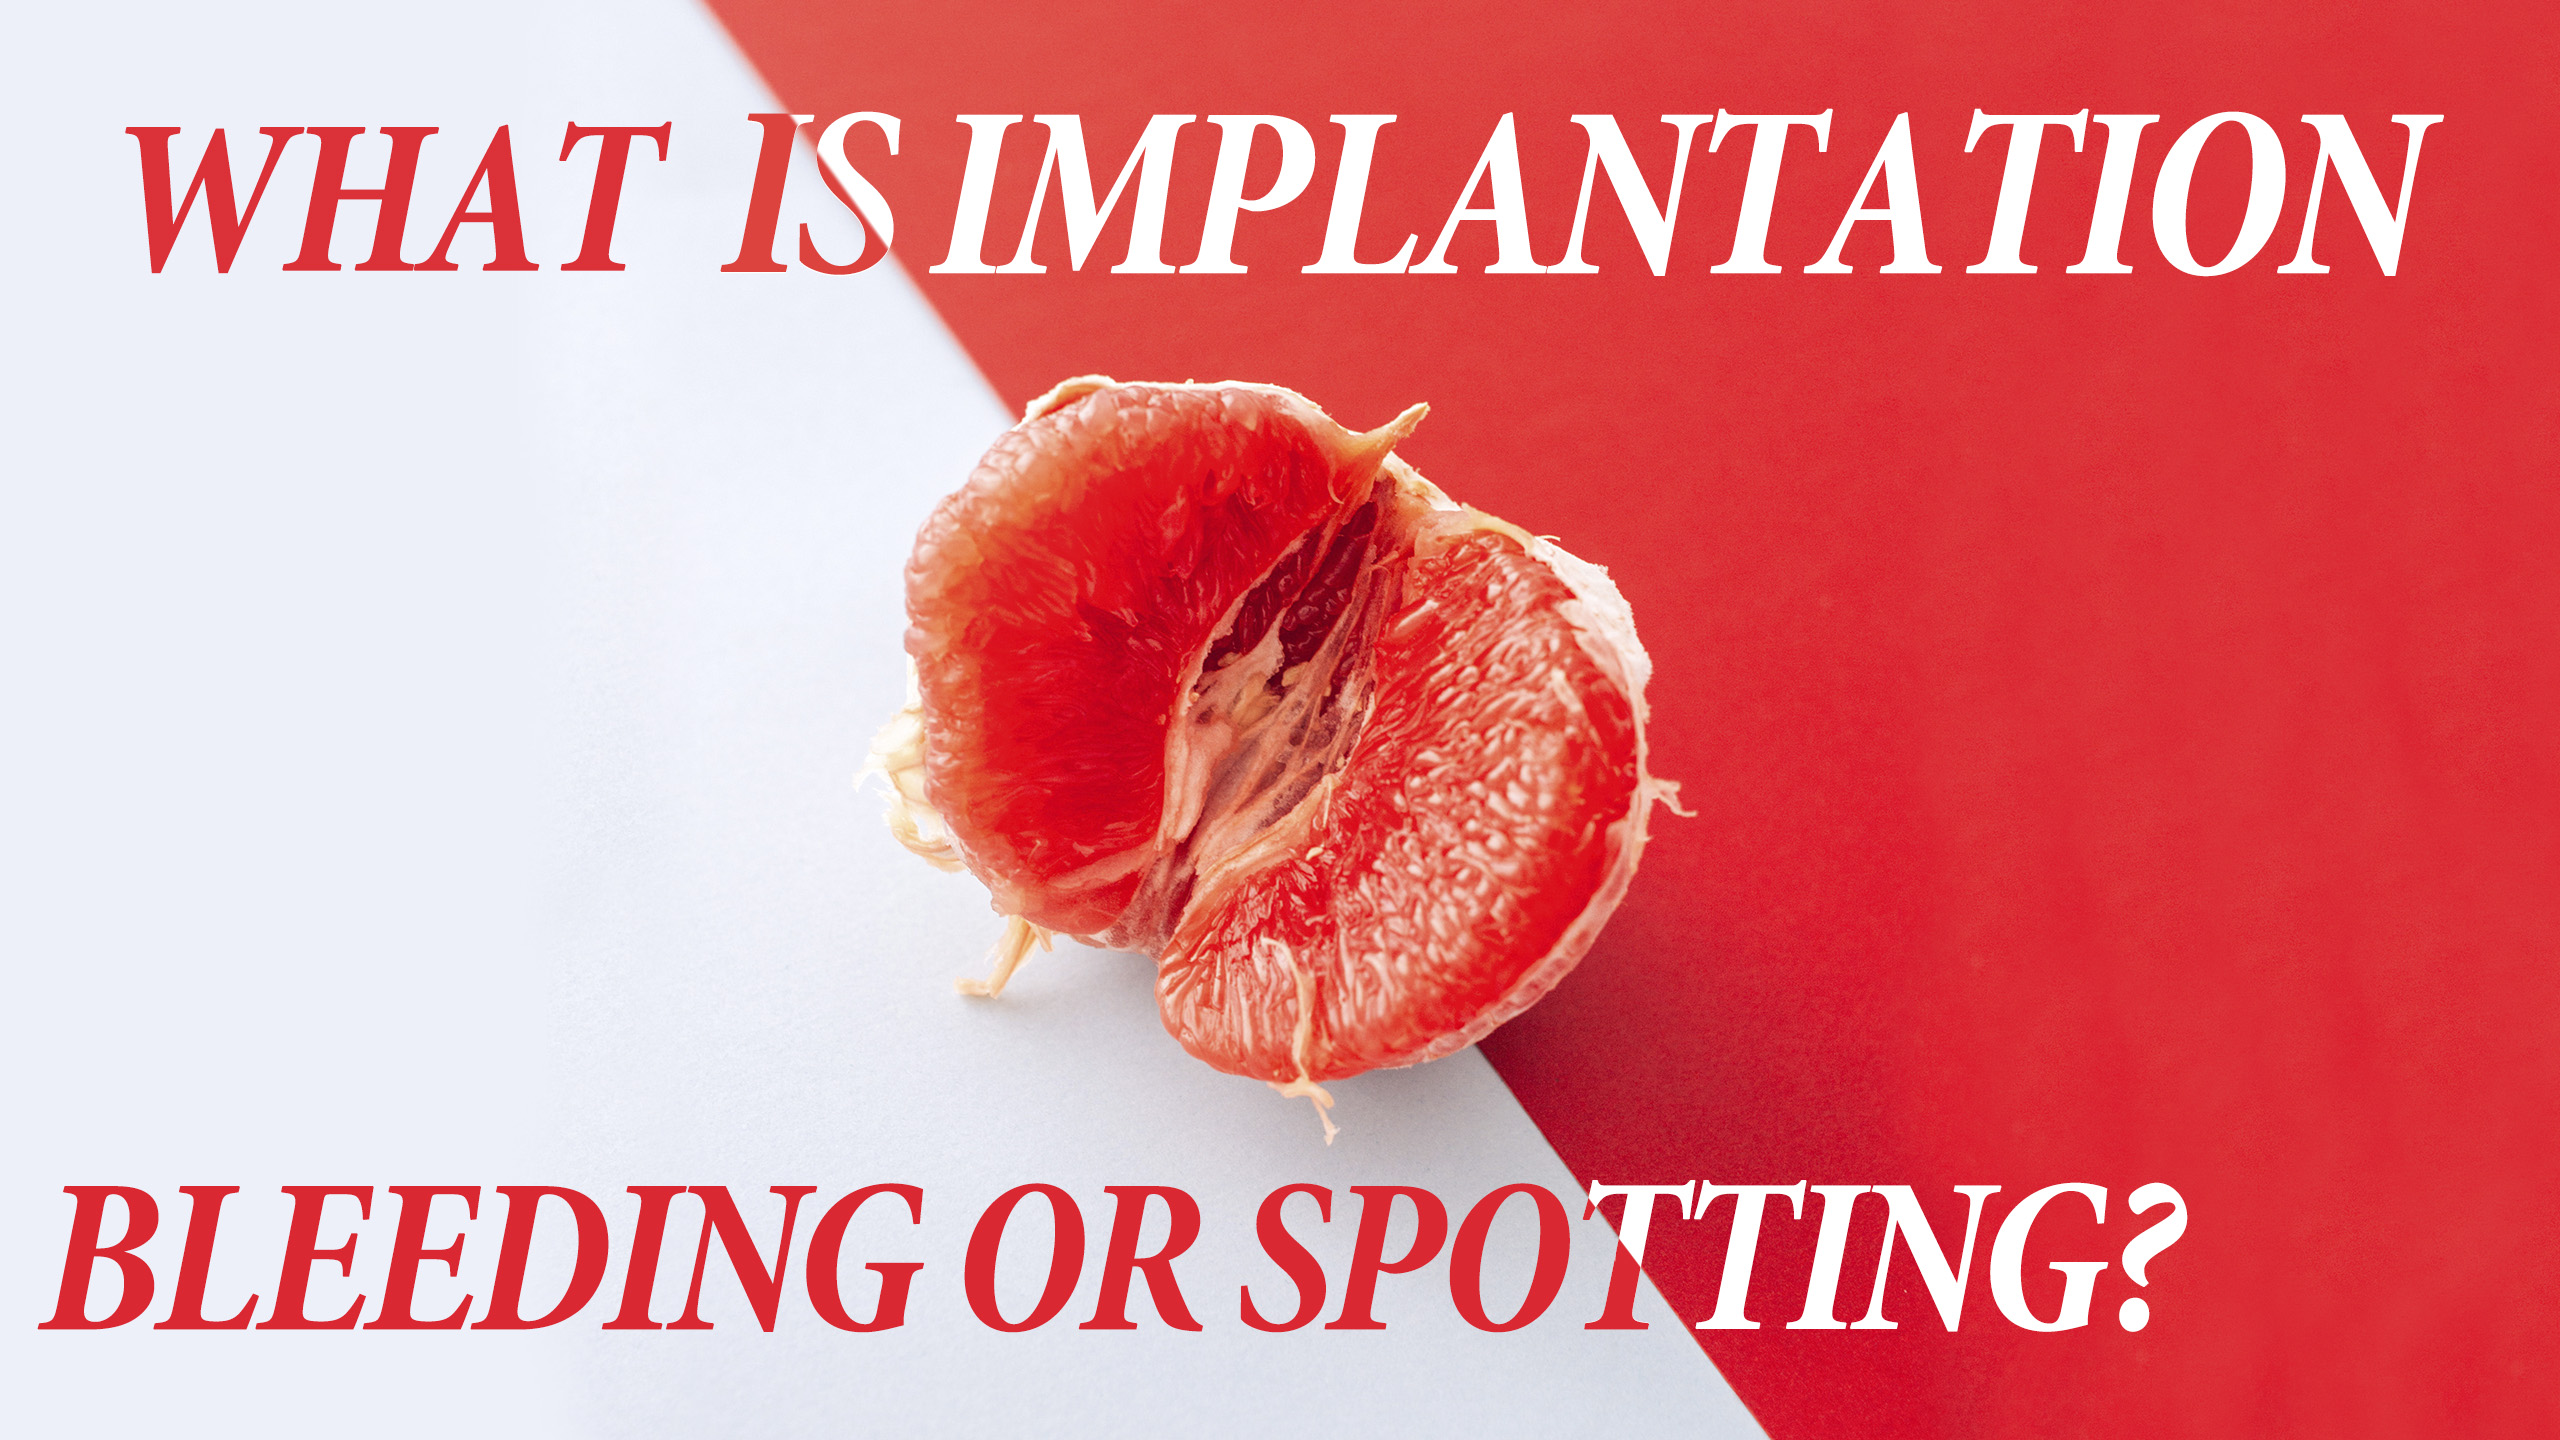 What is Implantation Bleeding or Spotting?